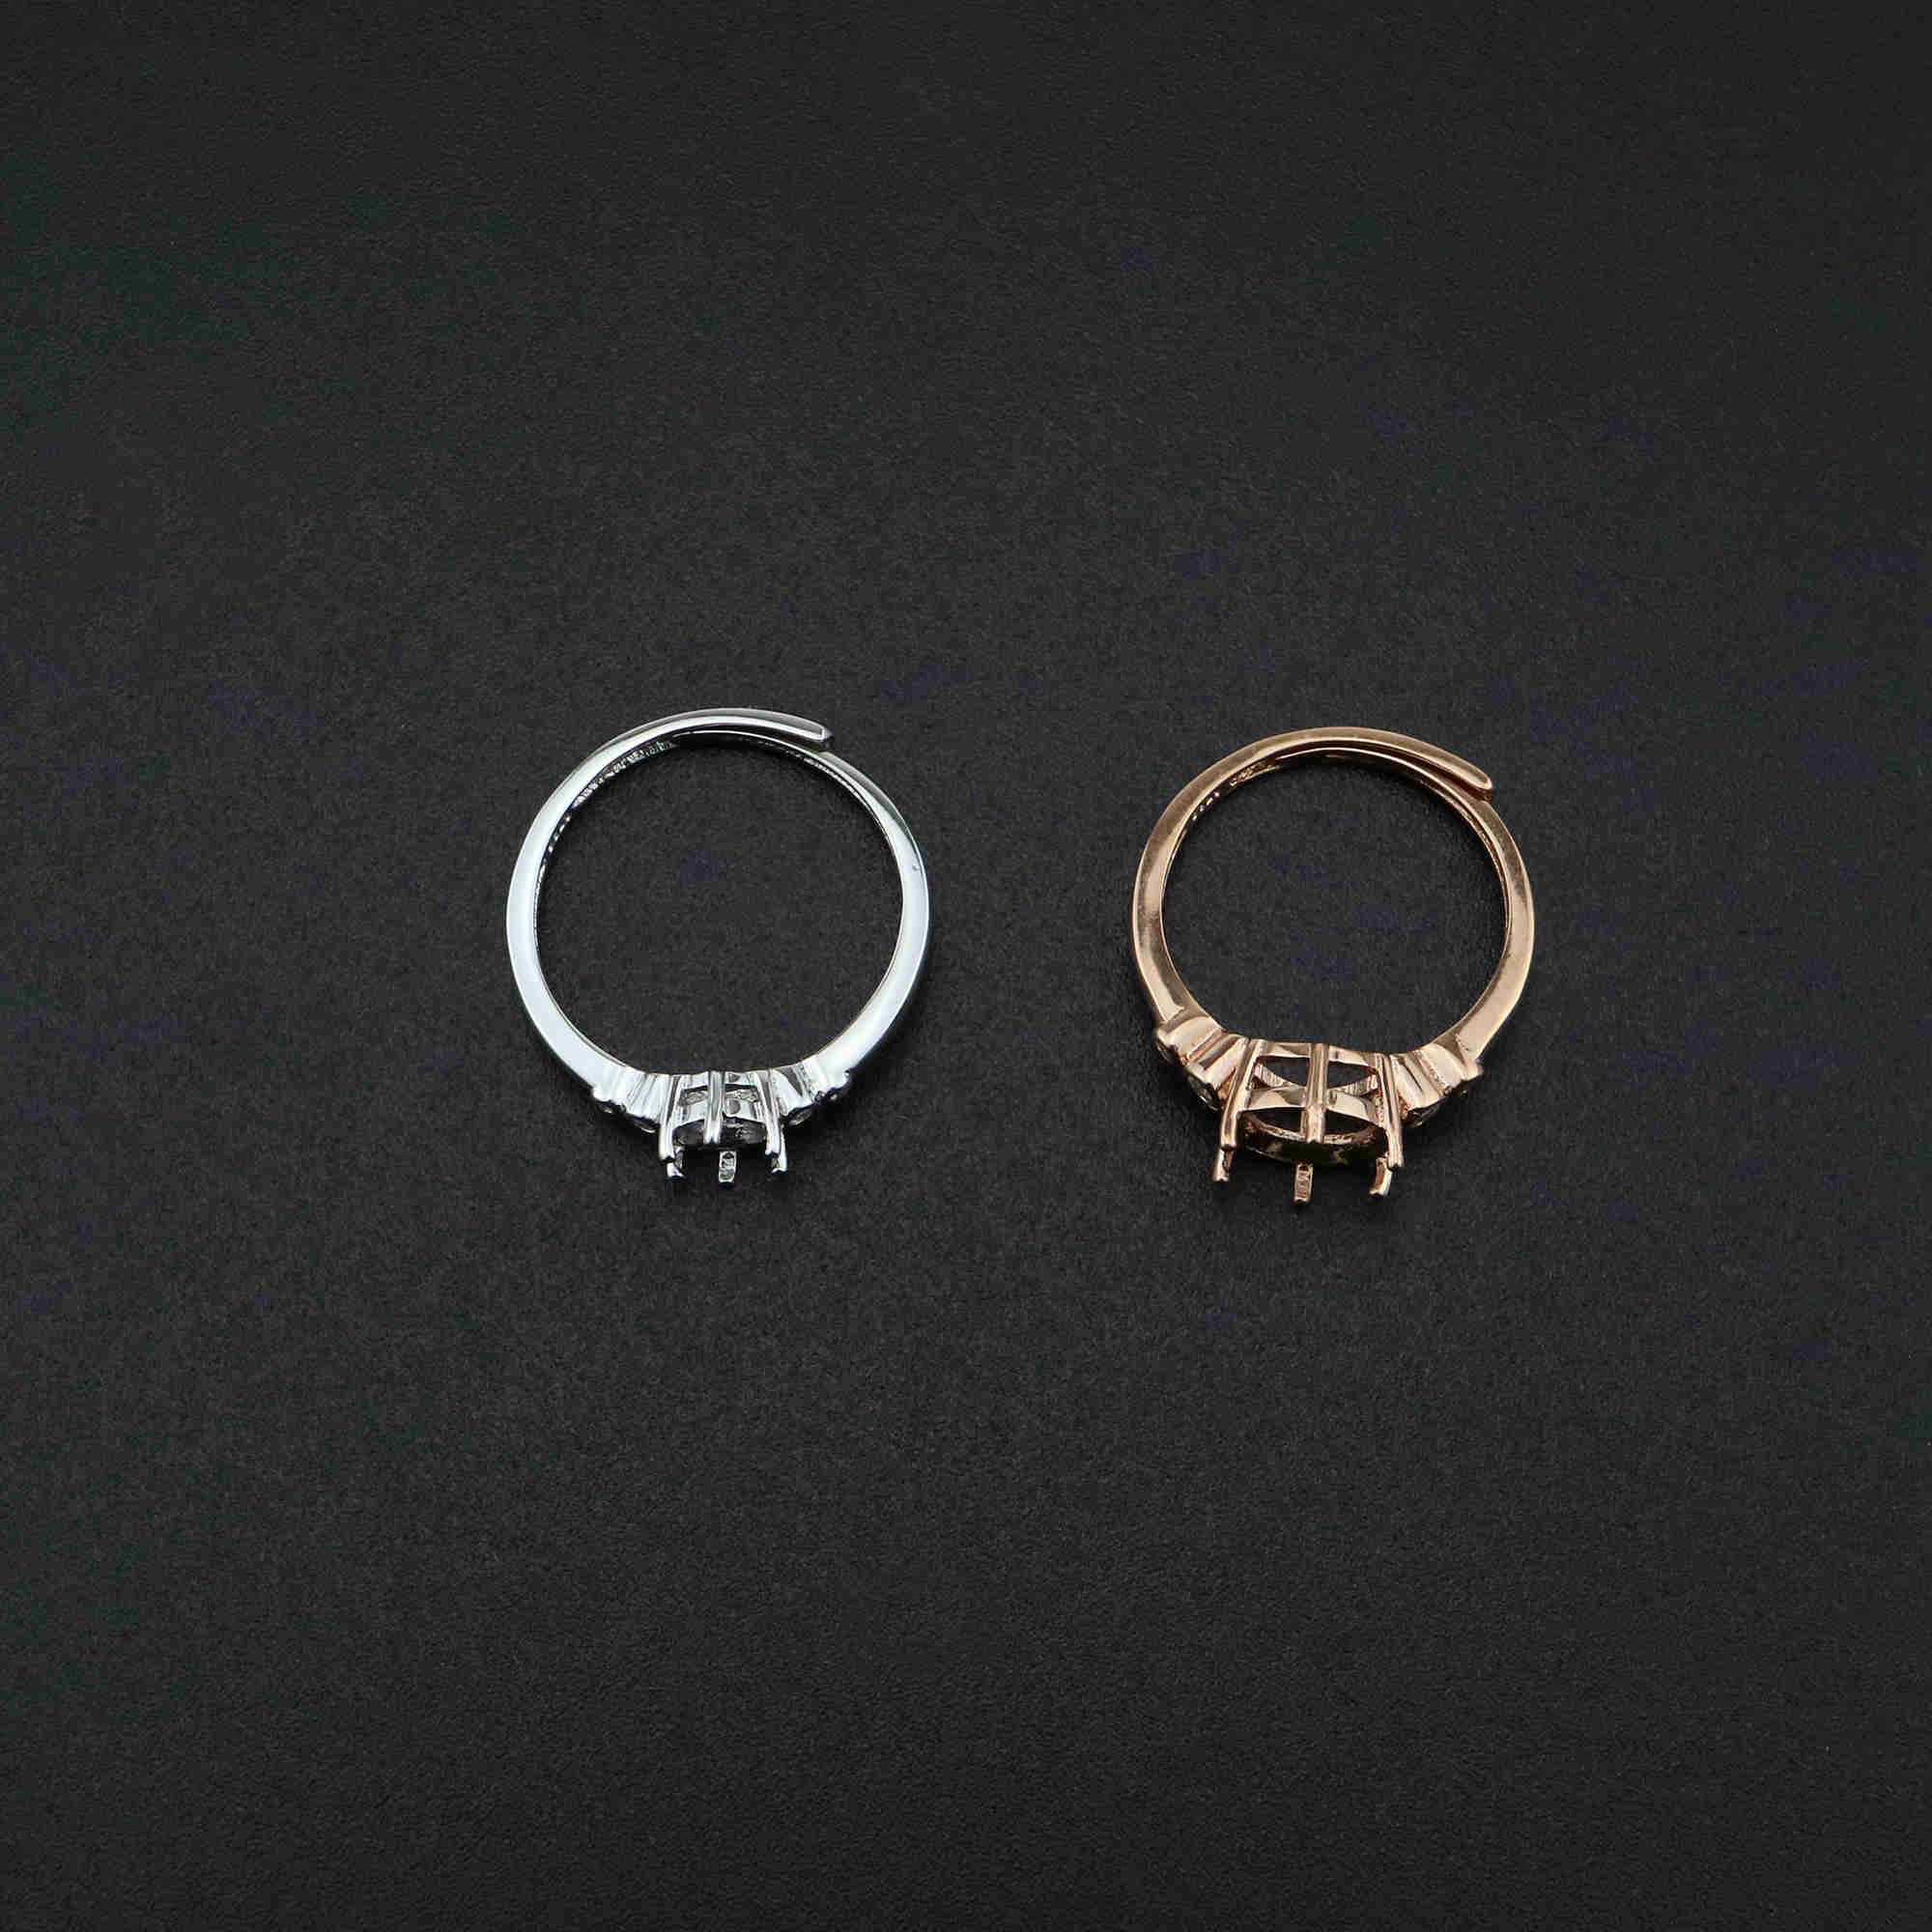 1Pcs 4-15MM Round Prong Bezel Rose Gold Plated Solid 925 Sterling Silver Adjustable Ring Settings for Moissanite Gemstone DIY Supplies 1210053 - Click Image to Close